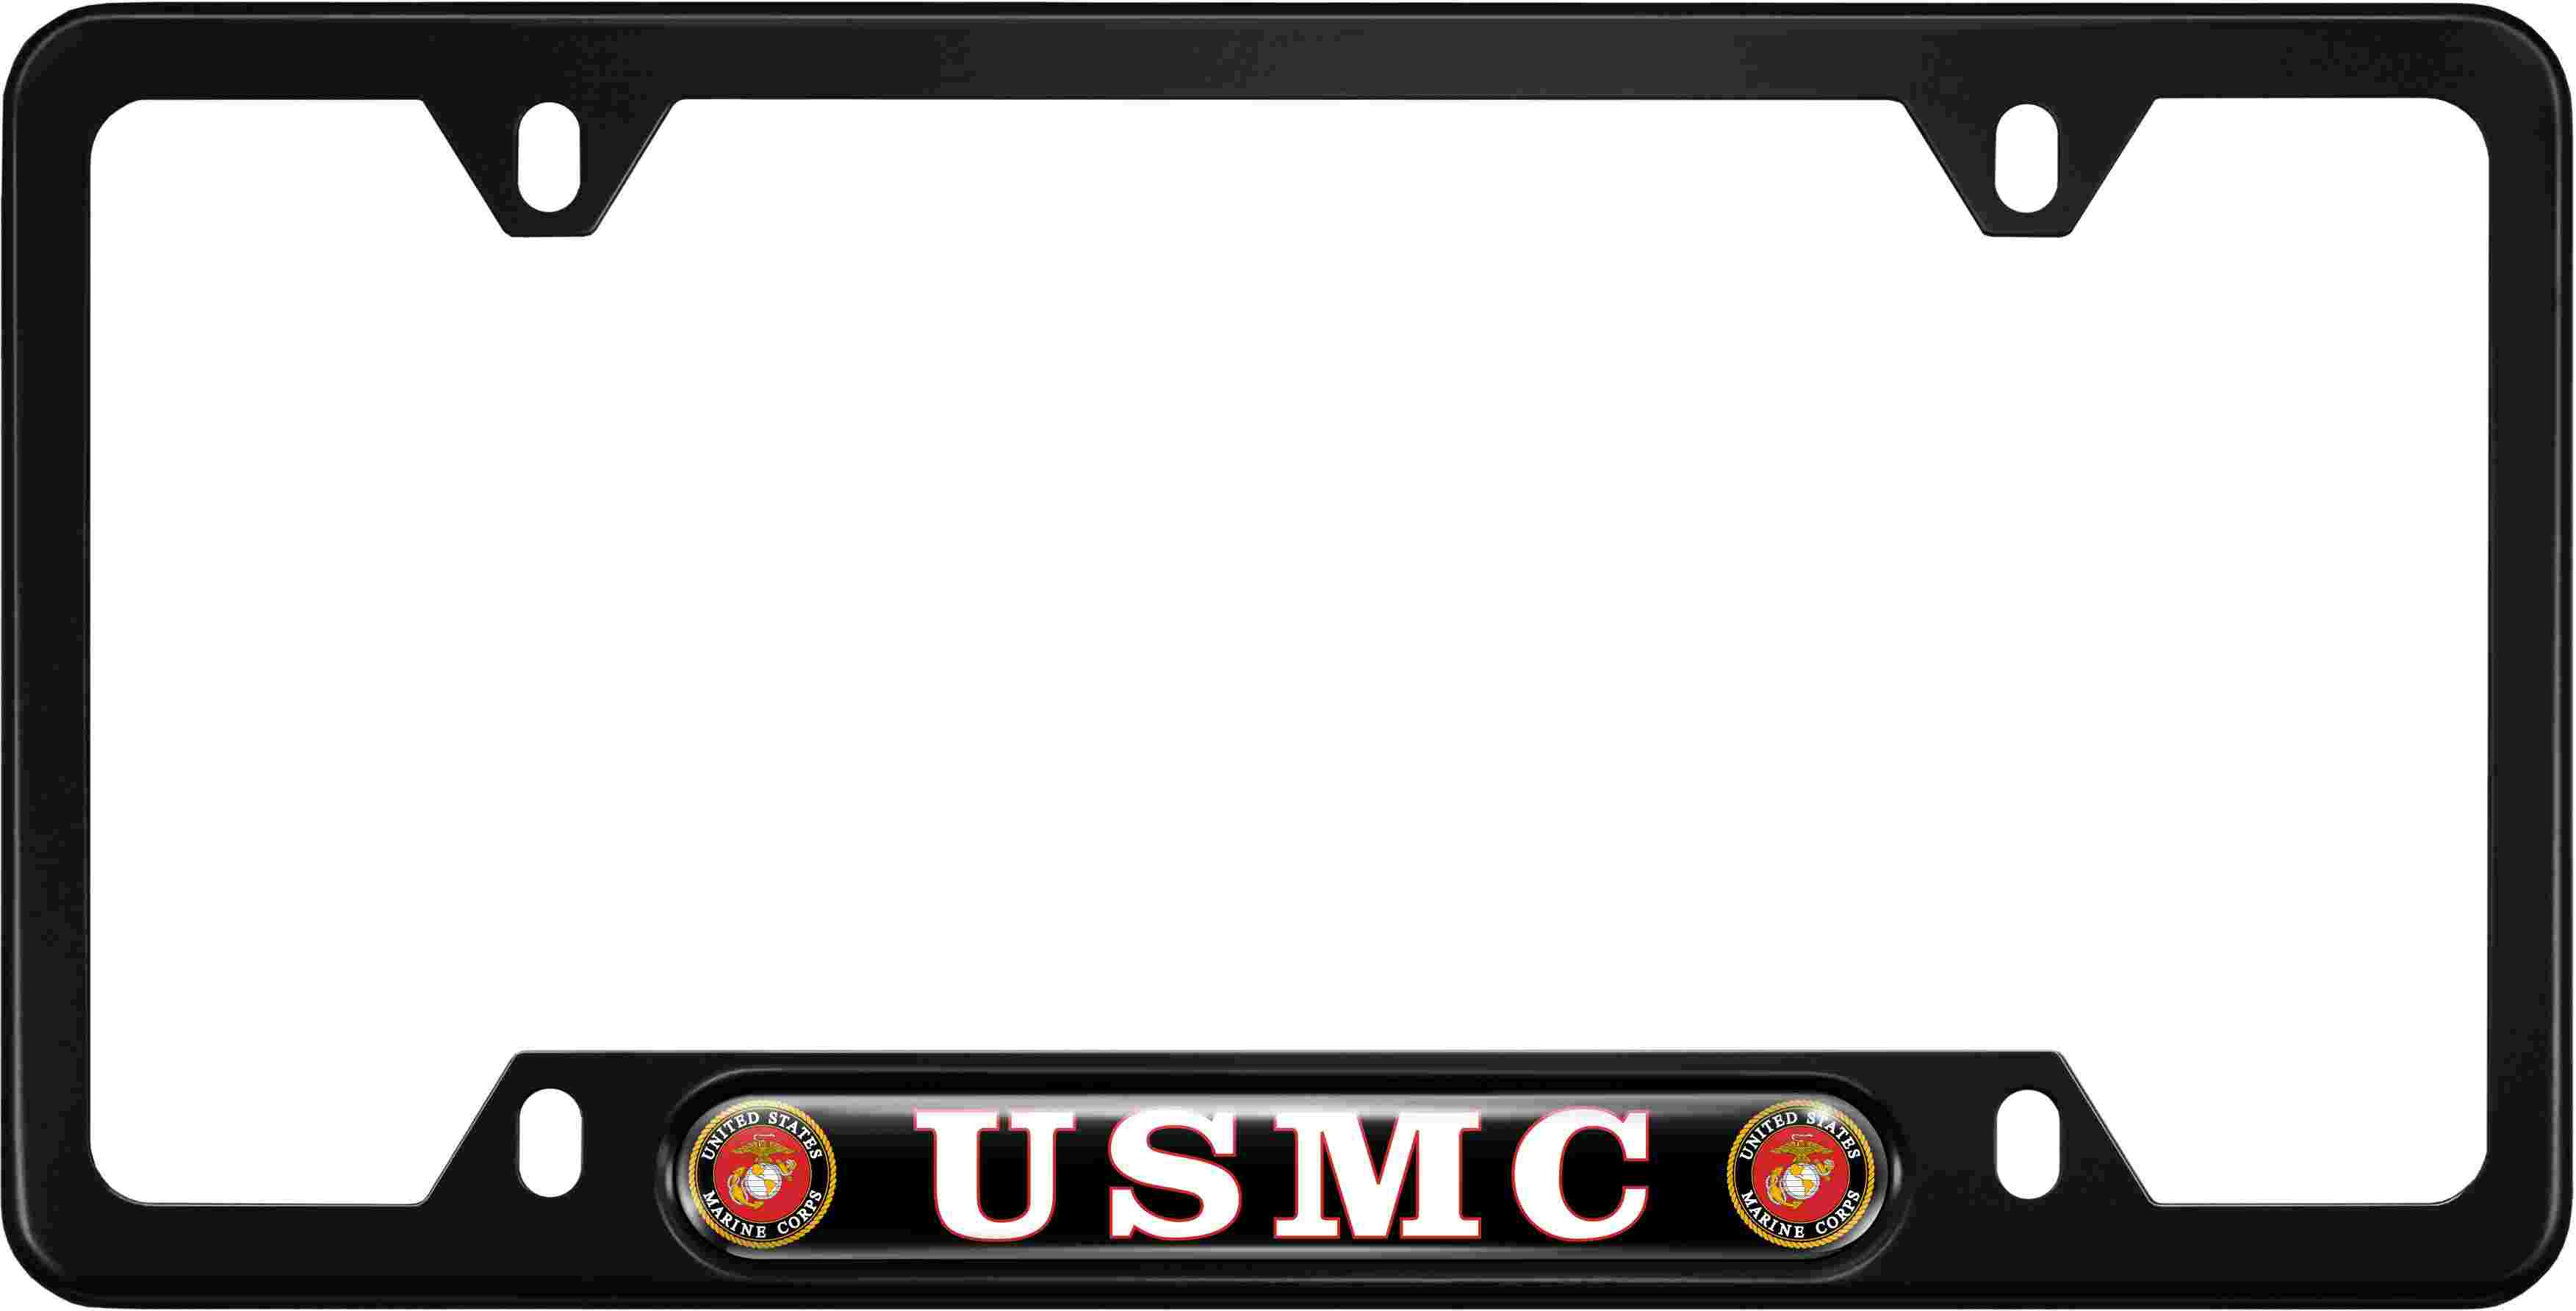 Top 4 Hole Metal Car License Plate Frame with Free caps USMC Semper Fidelis - Domed Custom-Made Personalized Narrow Red & Yellow Text Chrome Thin 